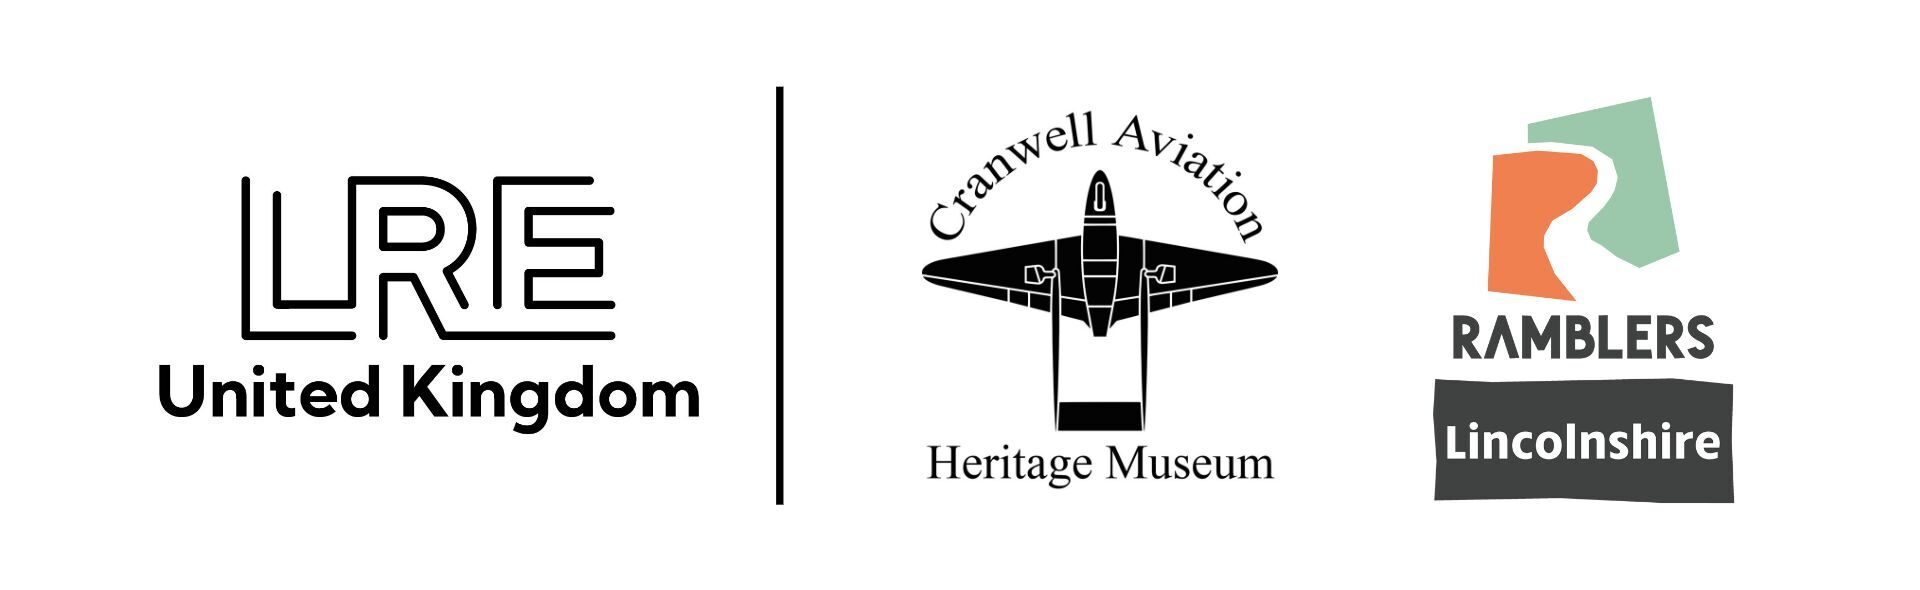 LRE Foundation signs Memorandums of Understanding with Cranwell Aviation Heritage Museum and Lincolnshire Ramblers (UK)